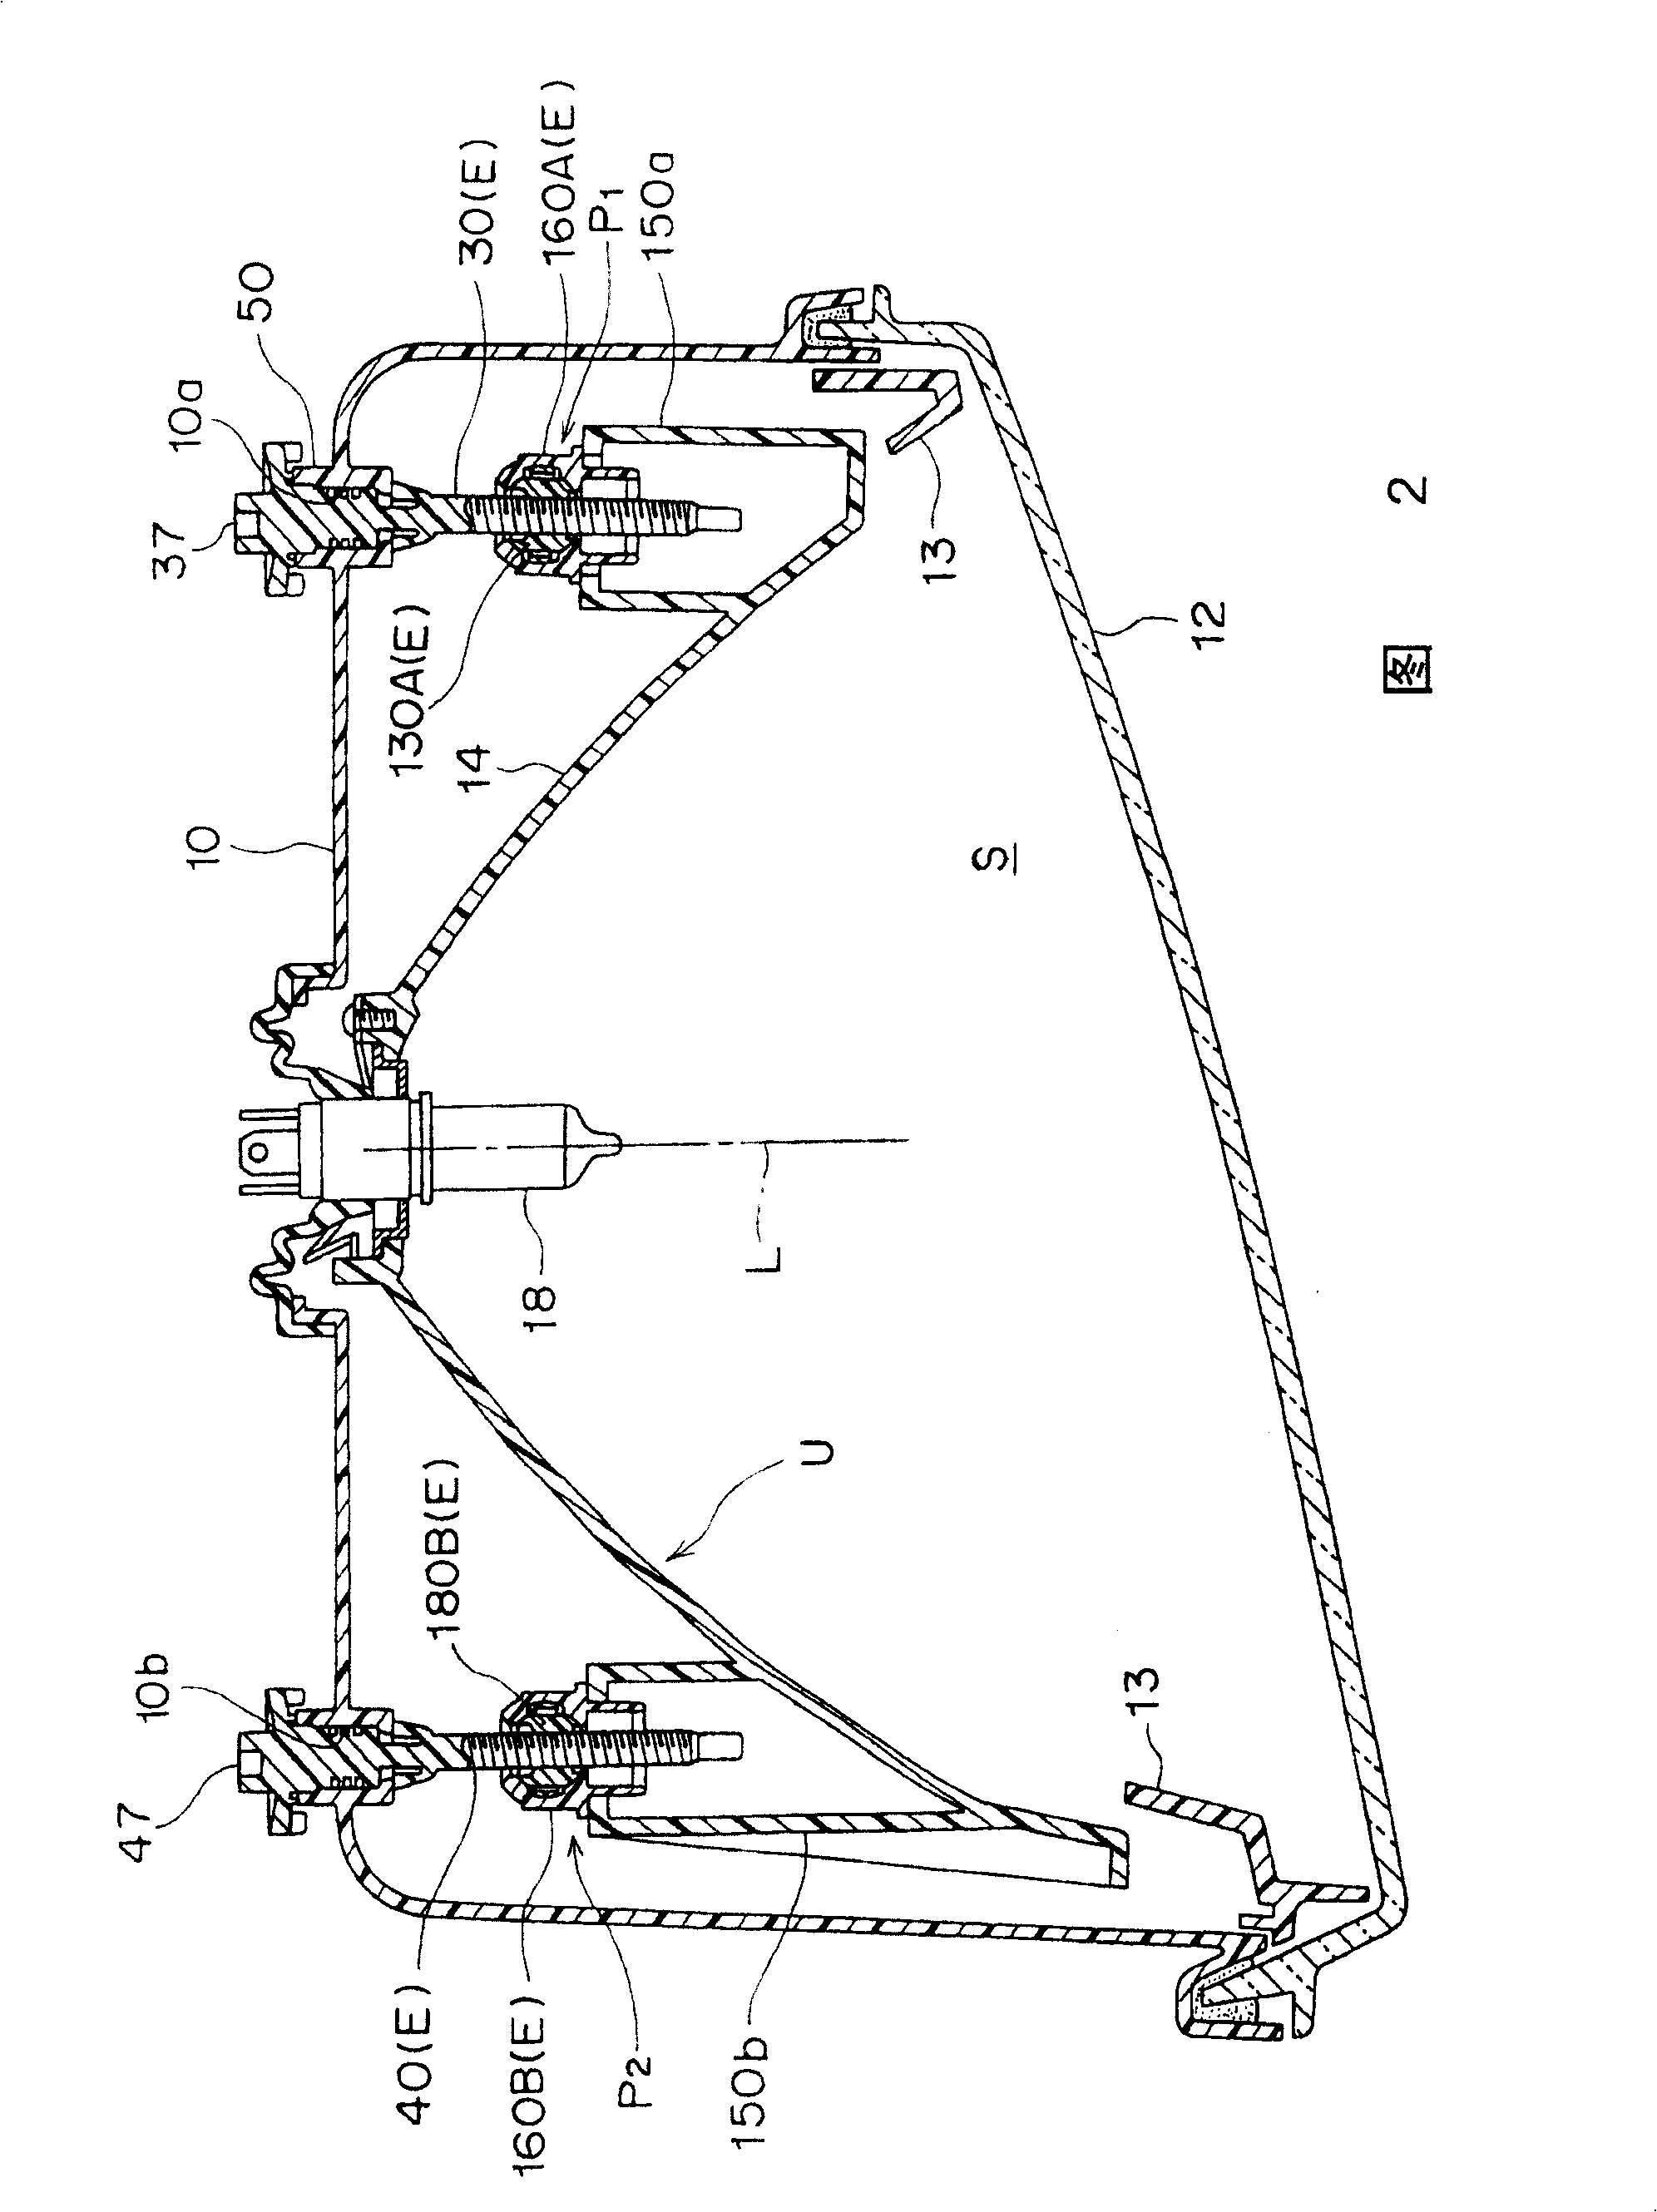 Headlight for vehicle with adjustable mirror